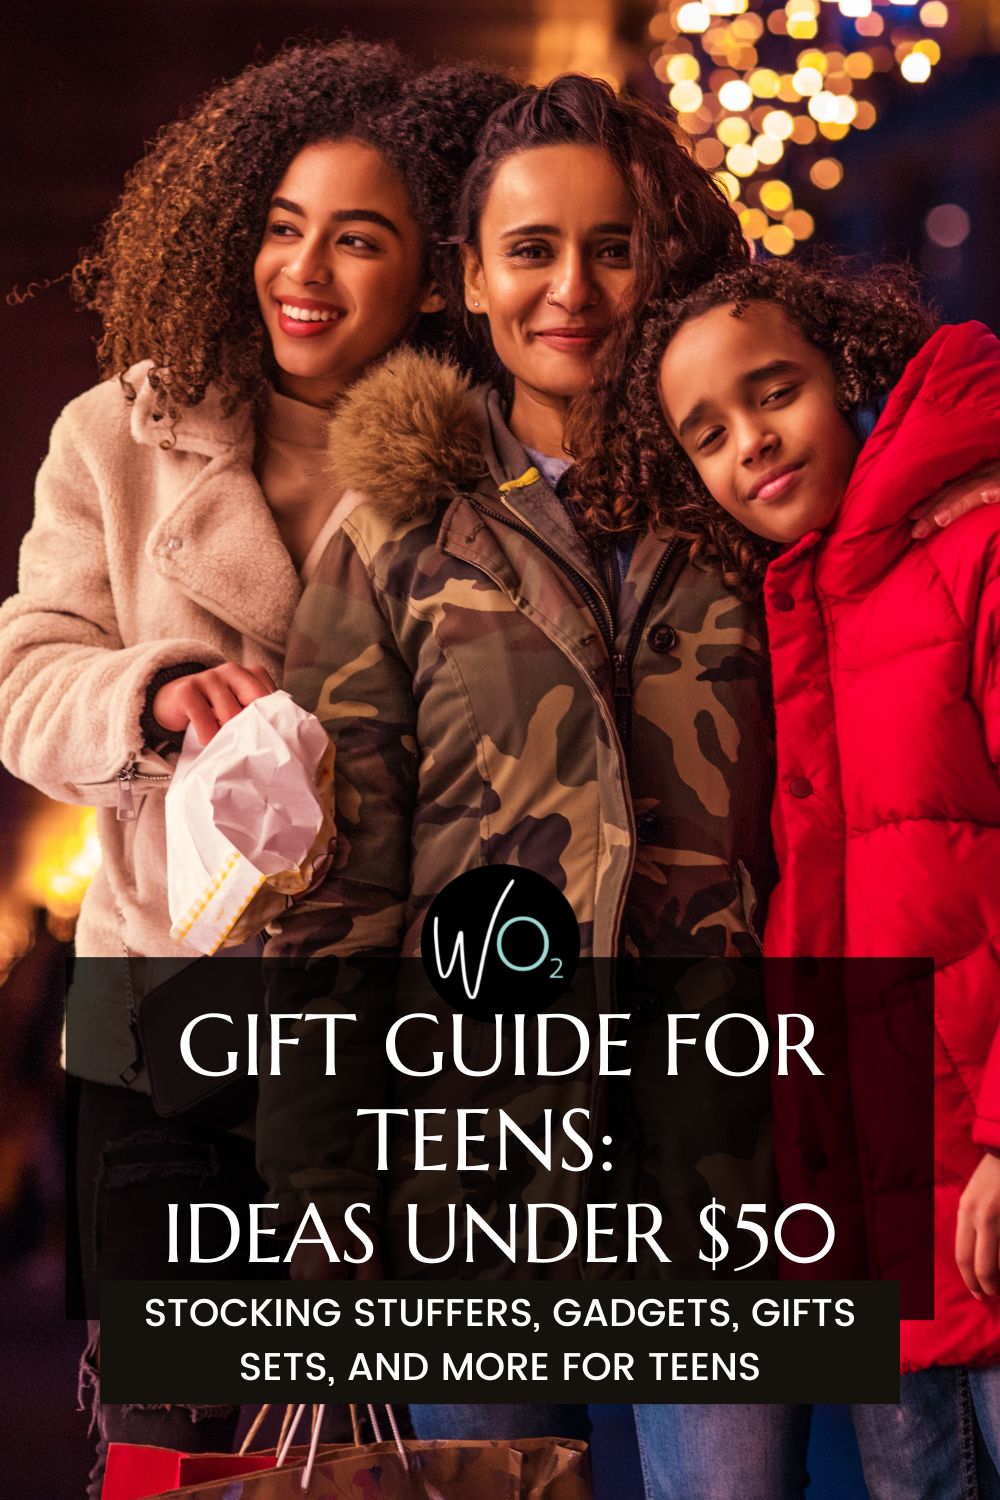 Top 10 Gifts Under 50$ for Xmas 2018